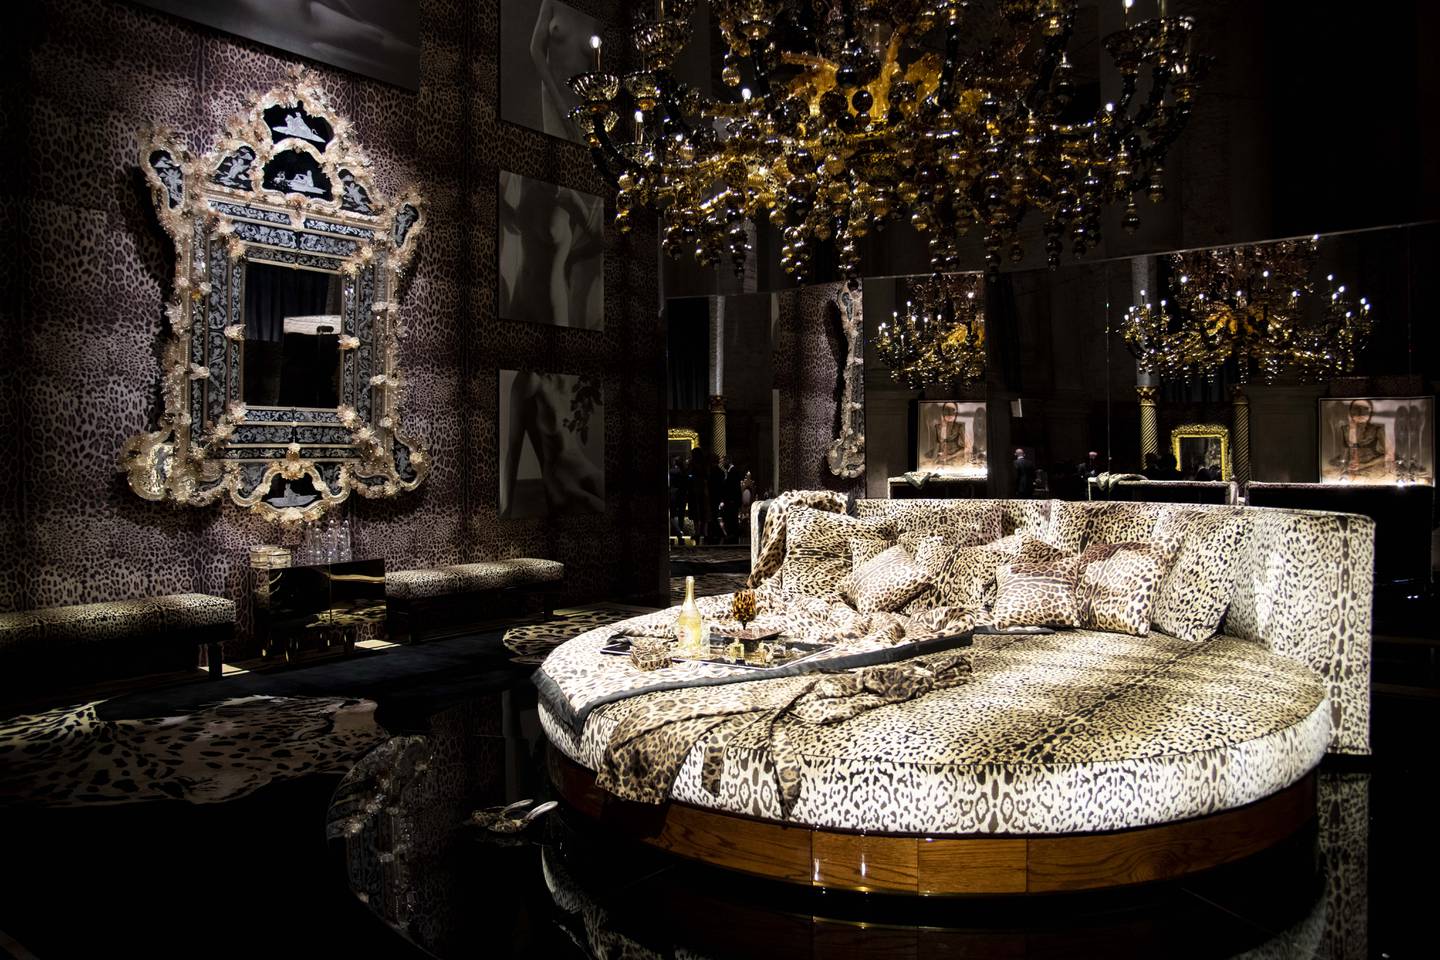 As a house signature, leopard print features heavily in the new Home collection by Dolce & Gabbana. Photo: Dolce & Gabbana.